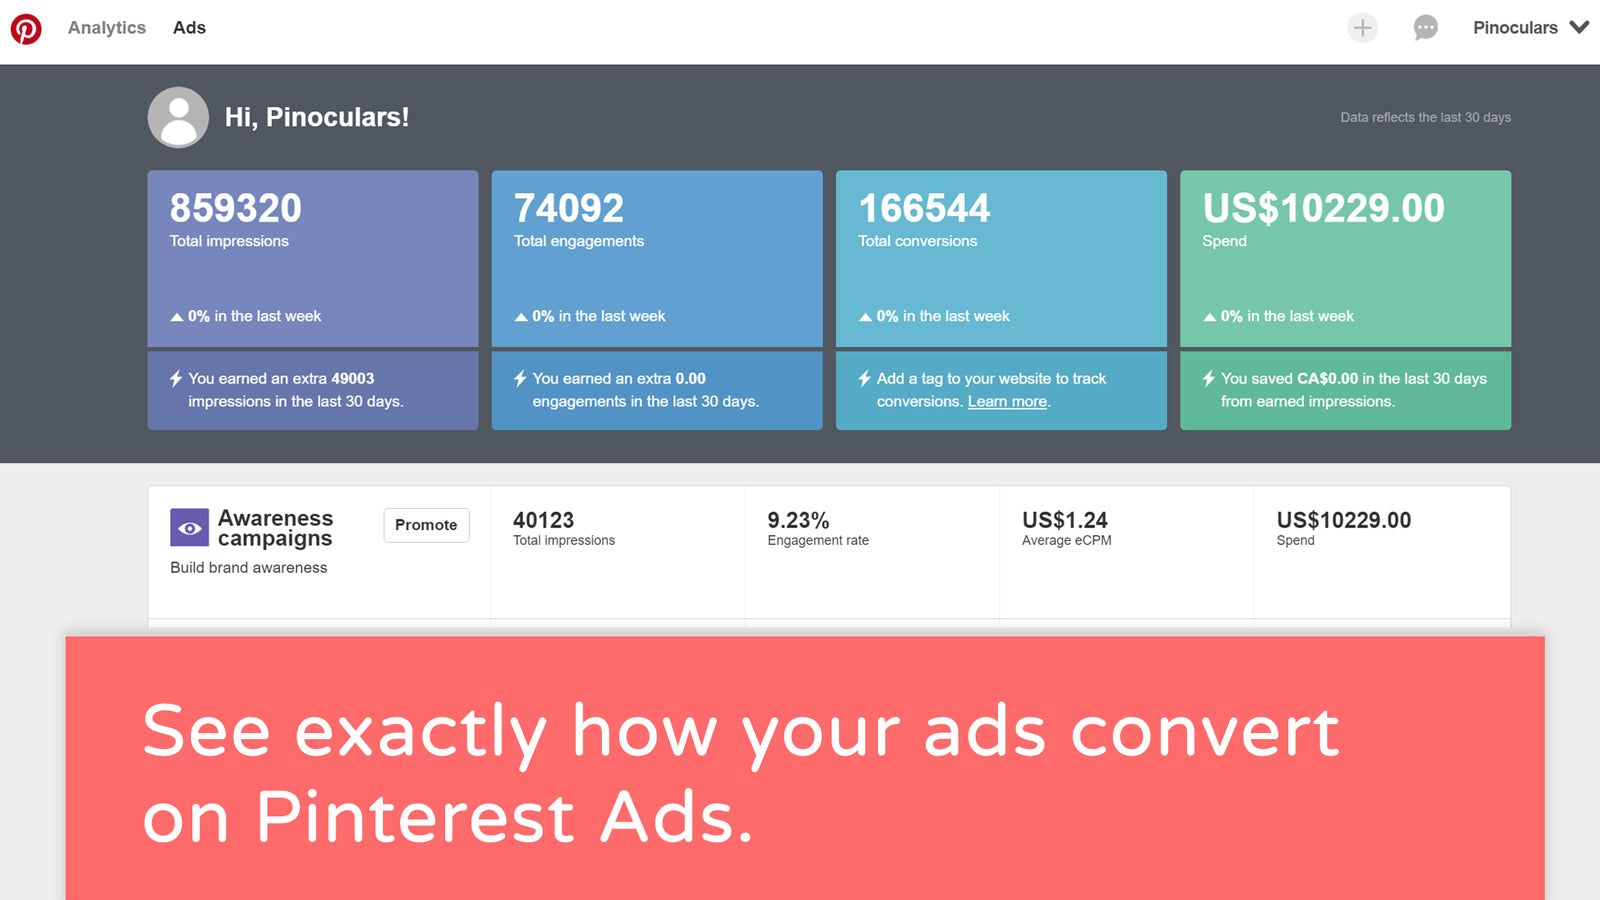 See exactly how your ads convert in Pinterest